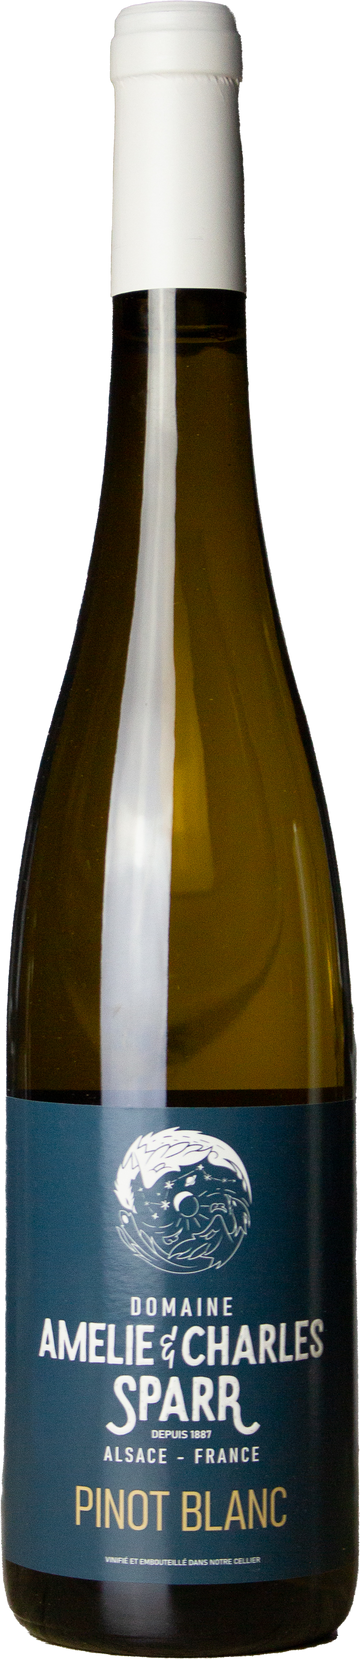 Domaine Charles Sparr - Pinot Blanc 